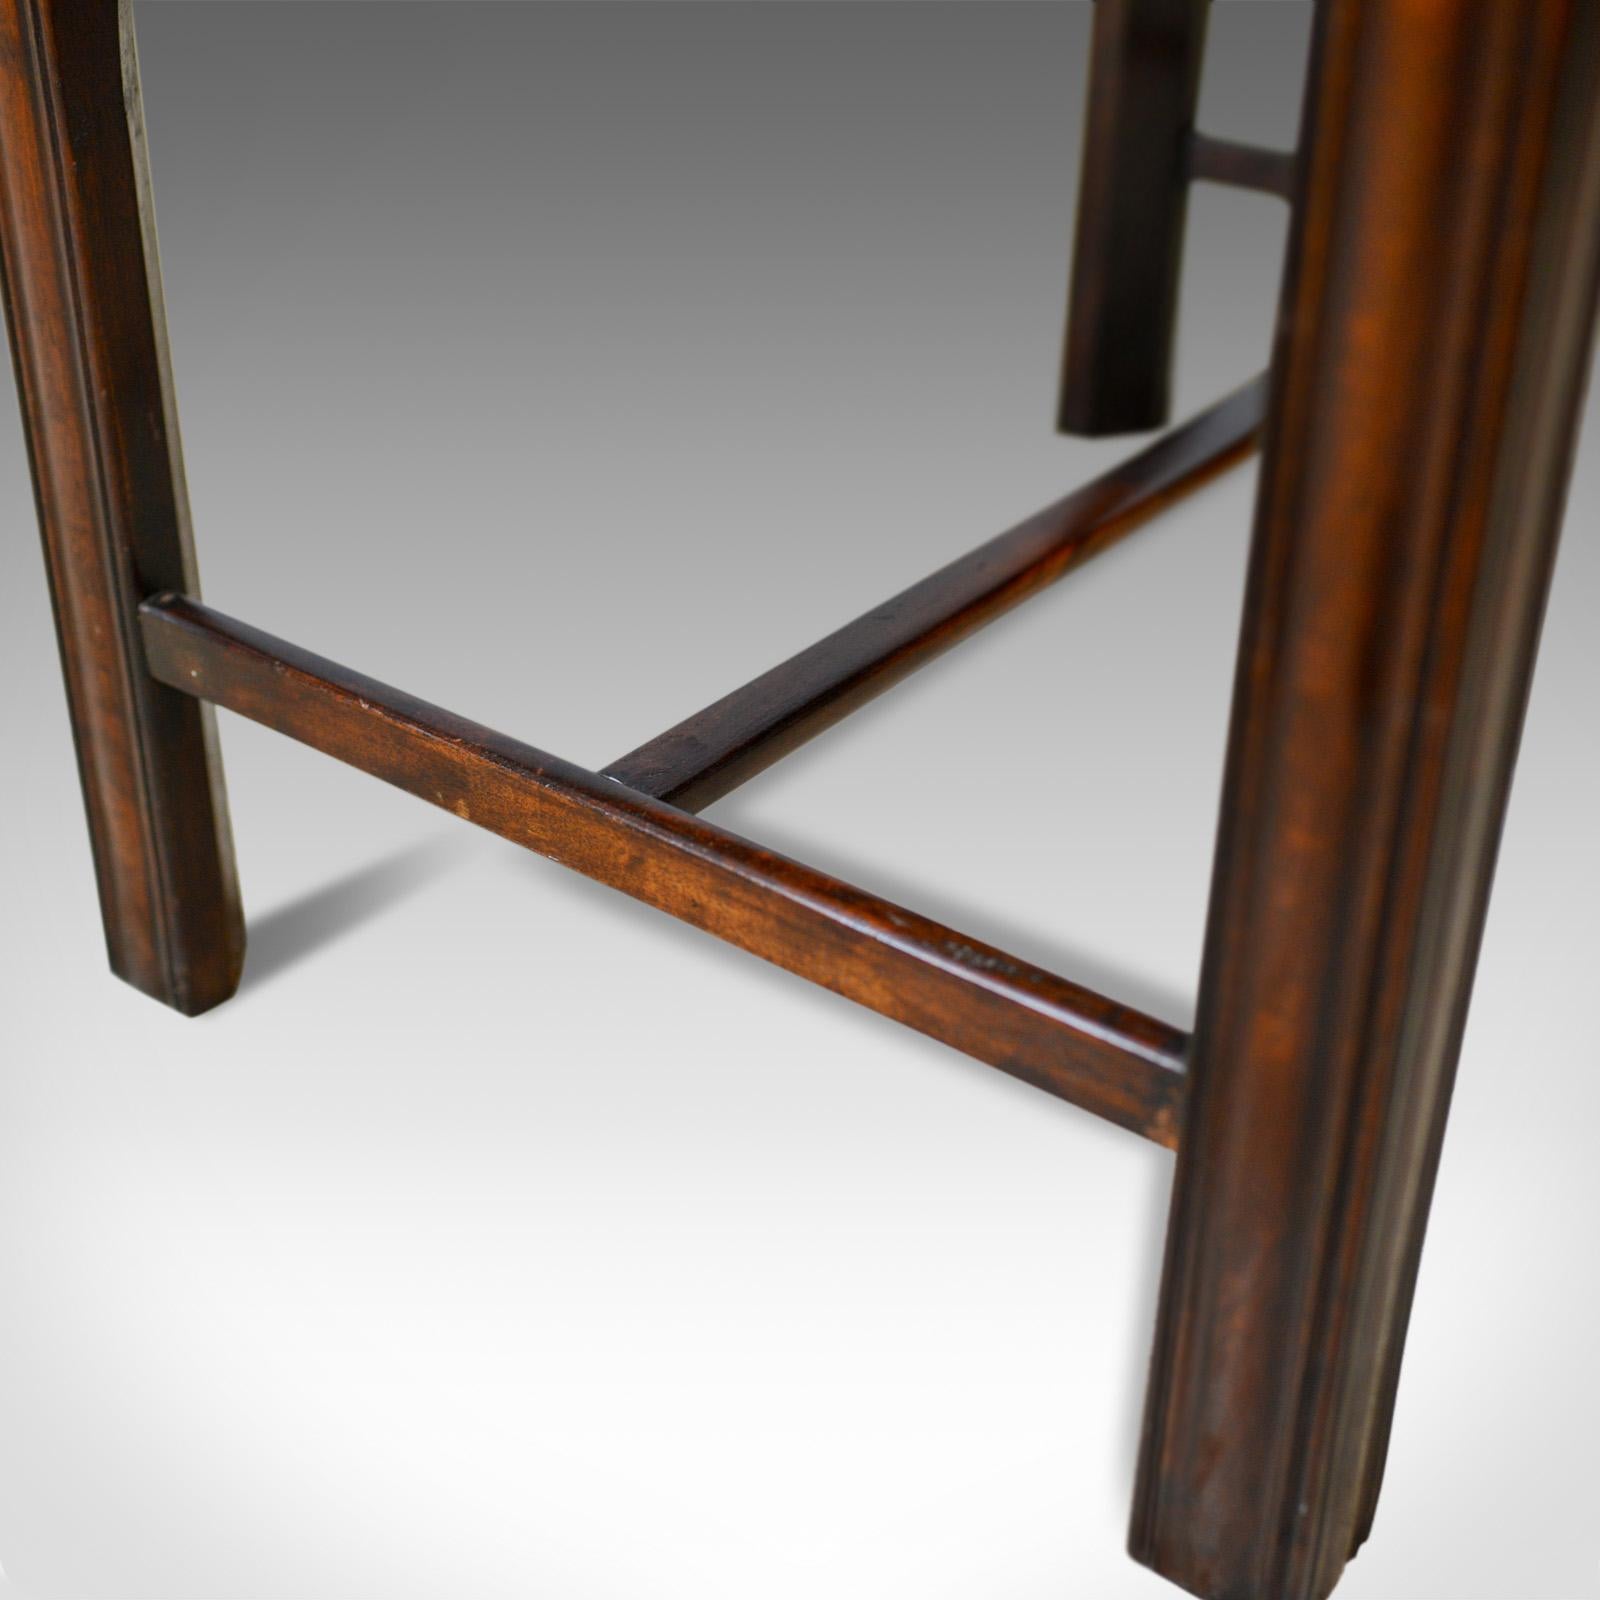 Vintage, Baize Top Side Table, English, Mahogany, Late 20th Century For Sale 2